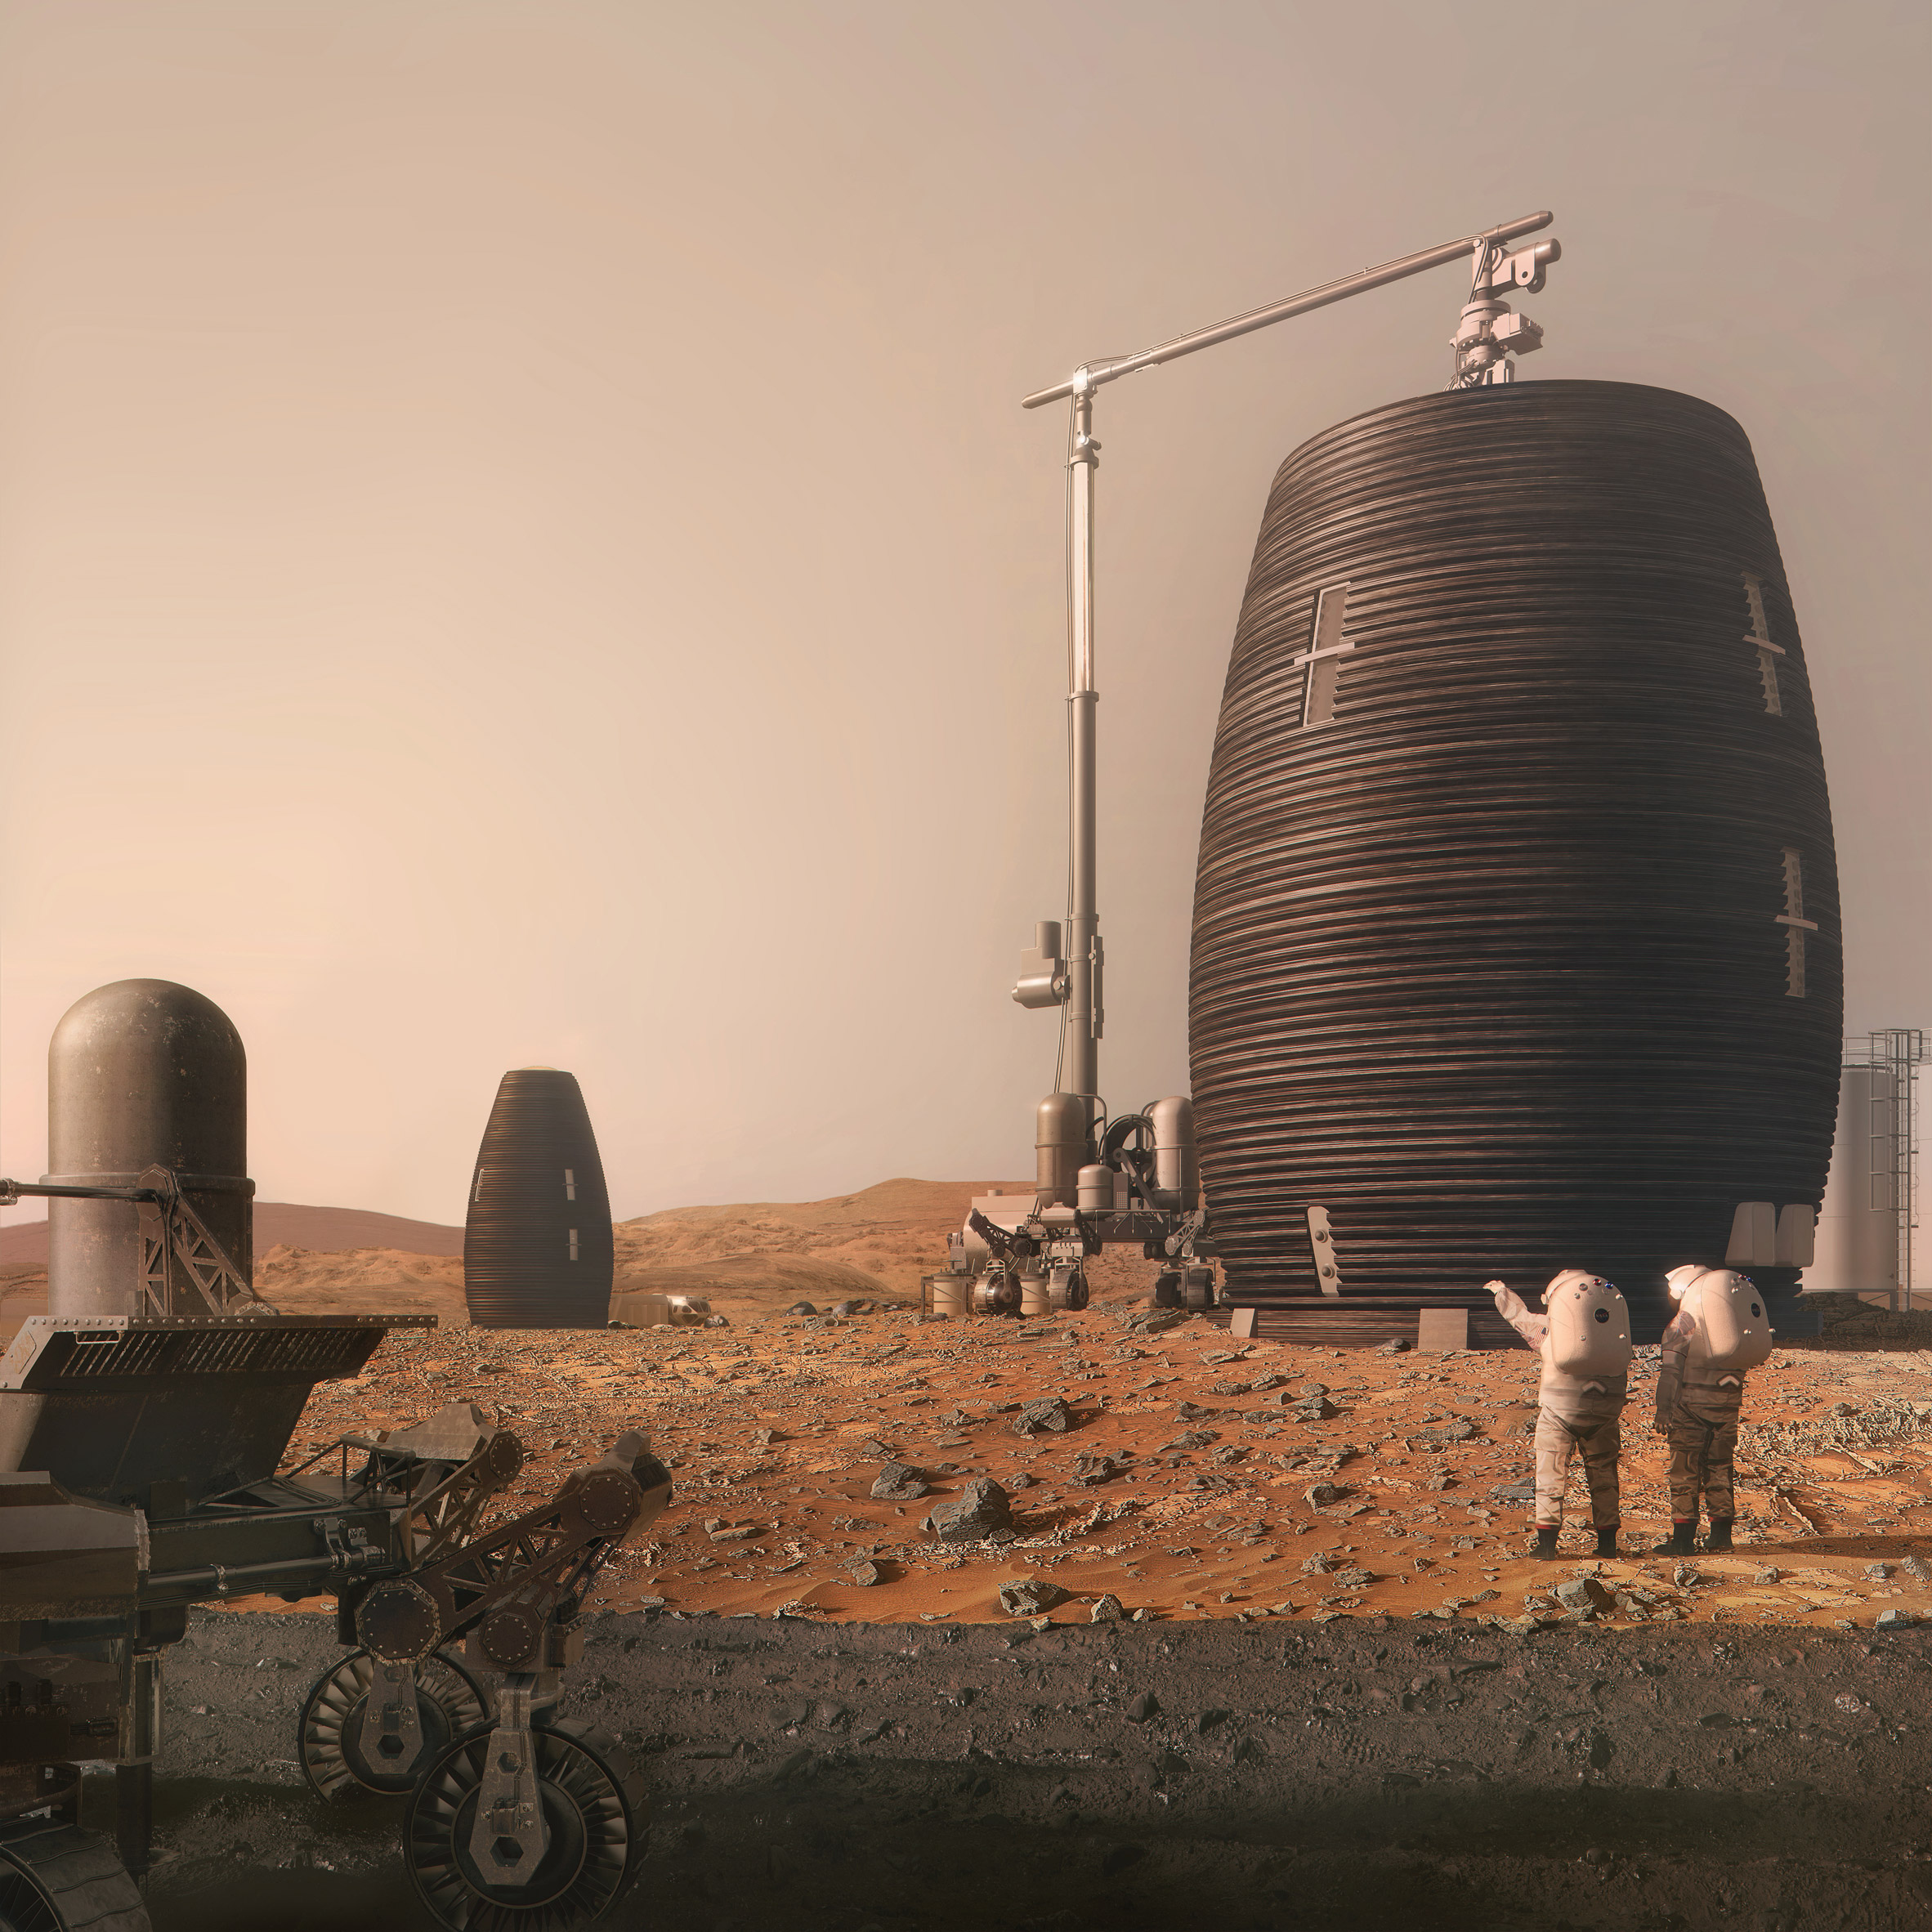 NASA announces winners of competition to design 3D-printed habitat for Mars